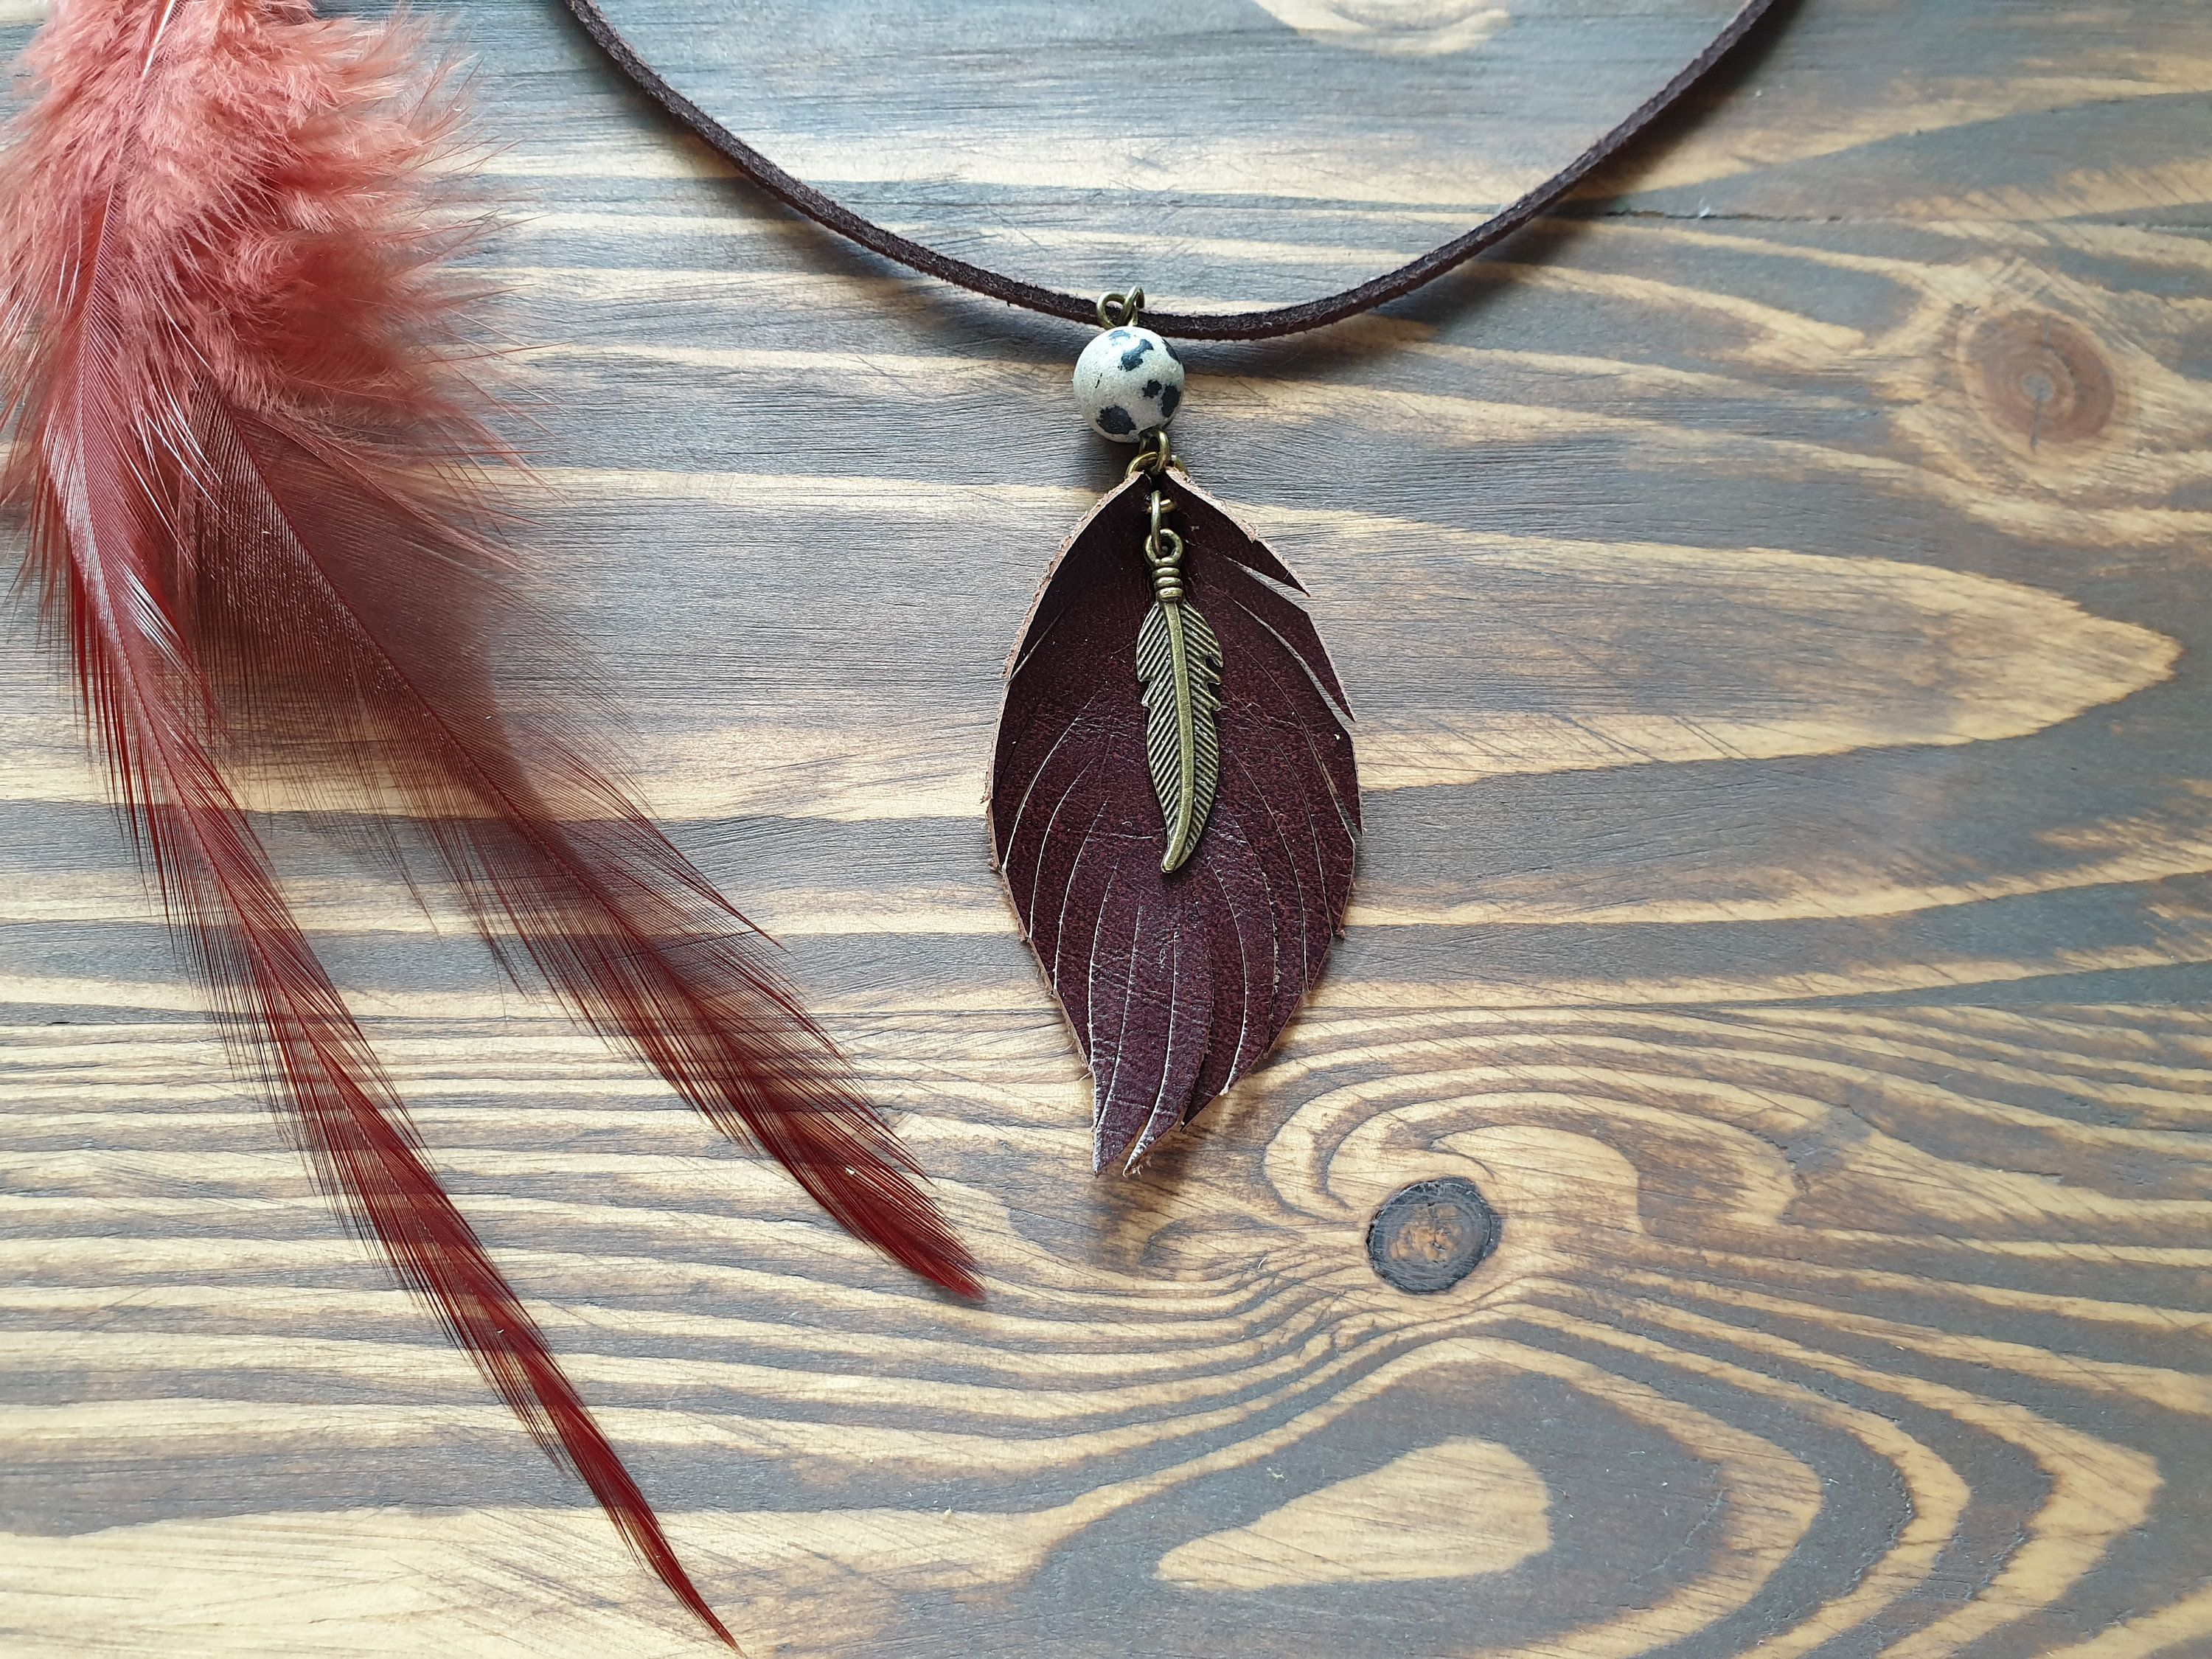 Leather Feather Necklace, Boho Necklace, Boho Jewelry, Leather Choker,  Choker Necklace With Pendant, Feather Pendant, Leather Jewelry Boho Pertaining To Most Recent Black Leather Feather Choker Necklaces (View 16 of 25)